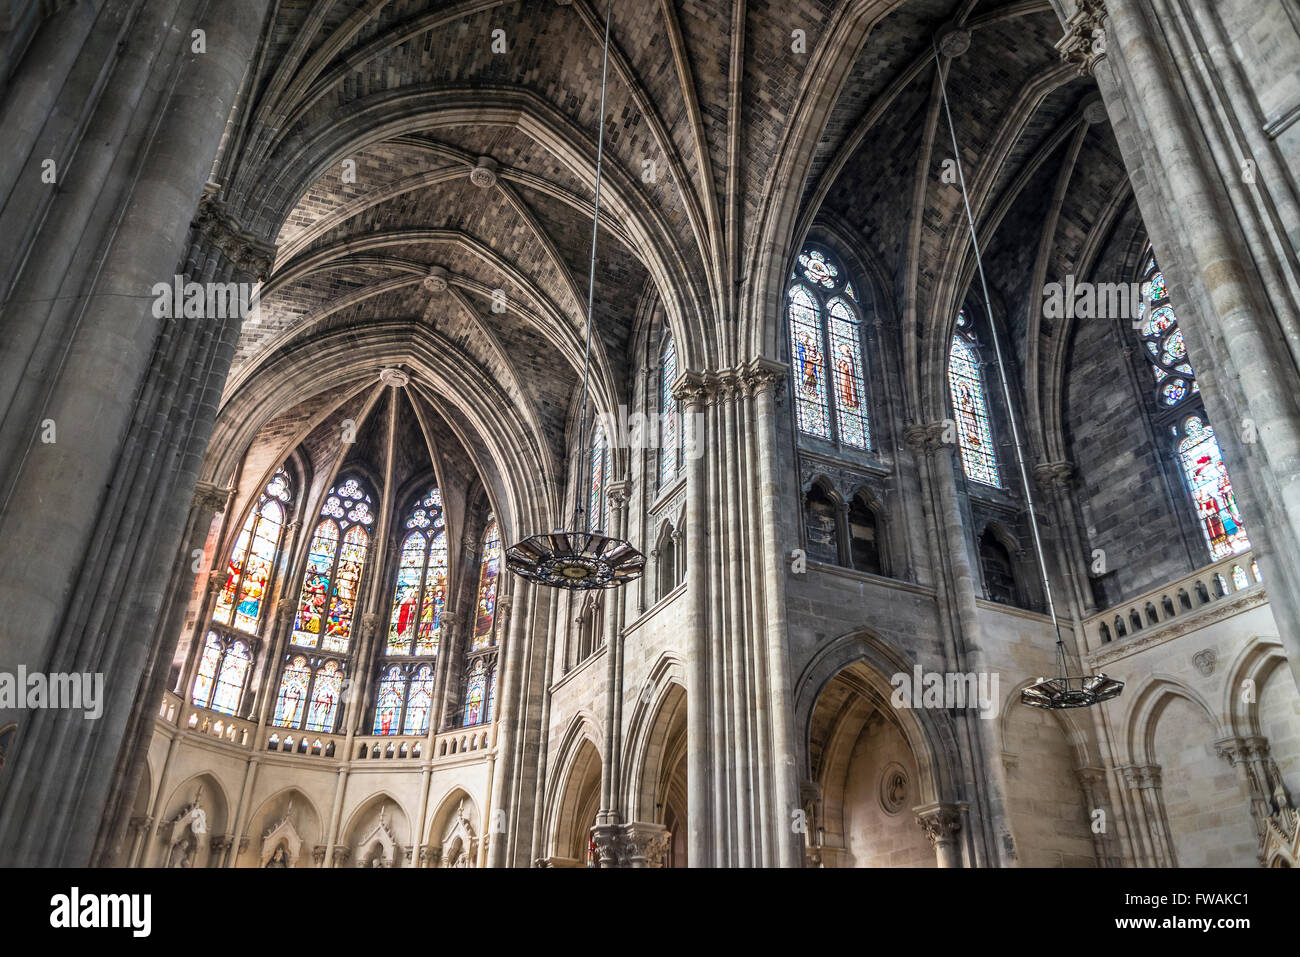 Aisle and apse in nave of St Louis des Chartrons church. Bordeaux, Aquitaine, France. Stock Photo